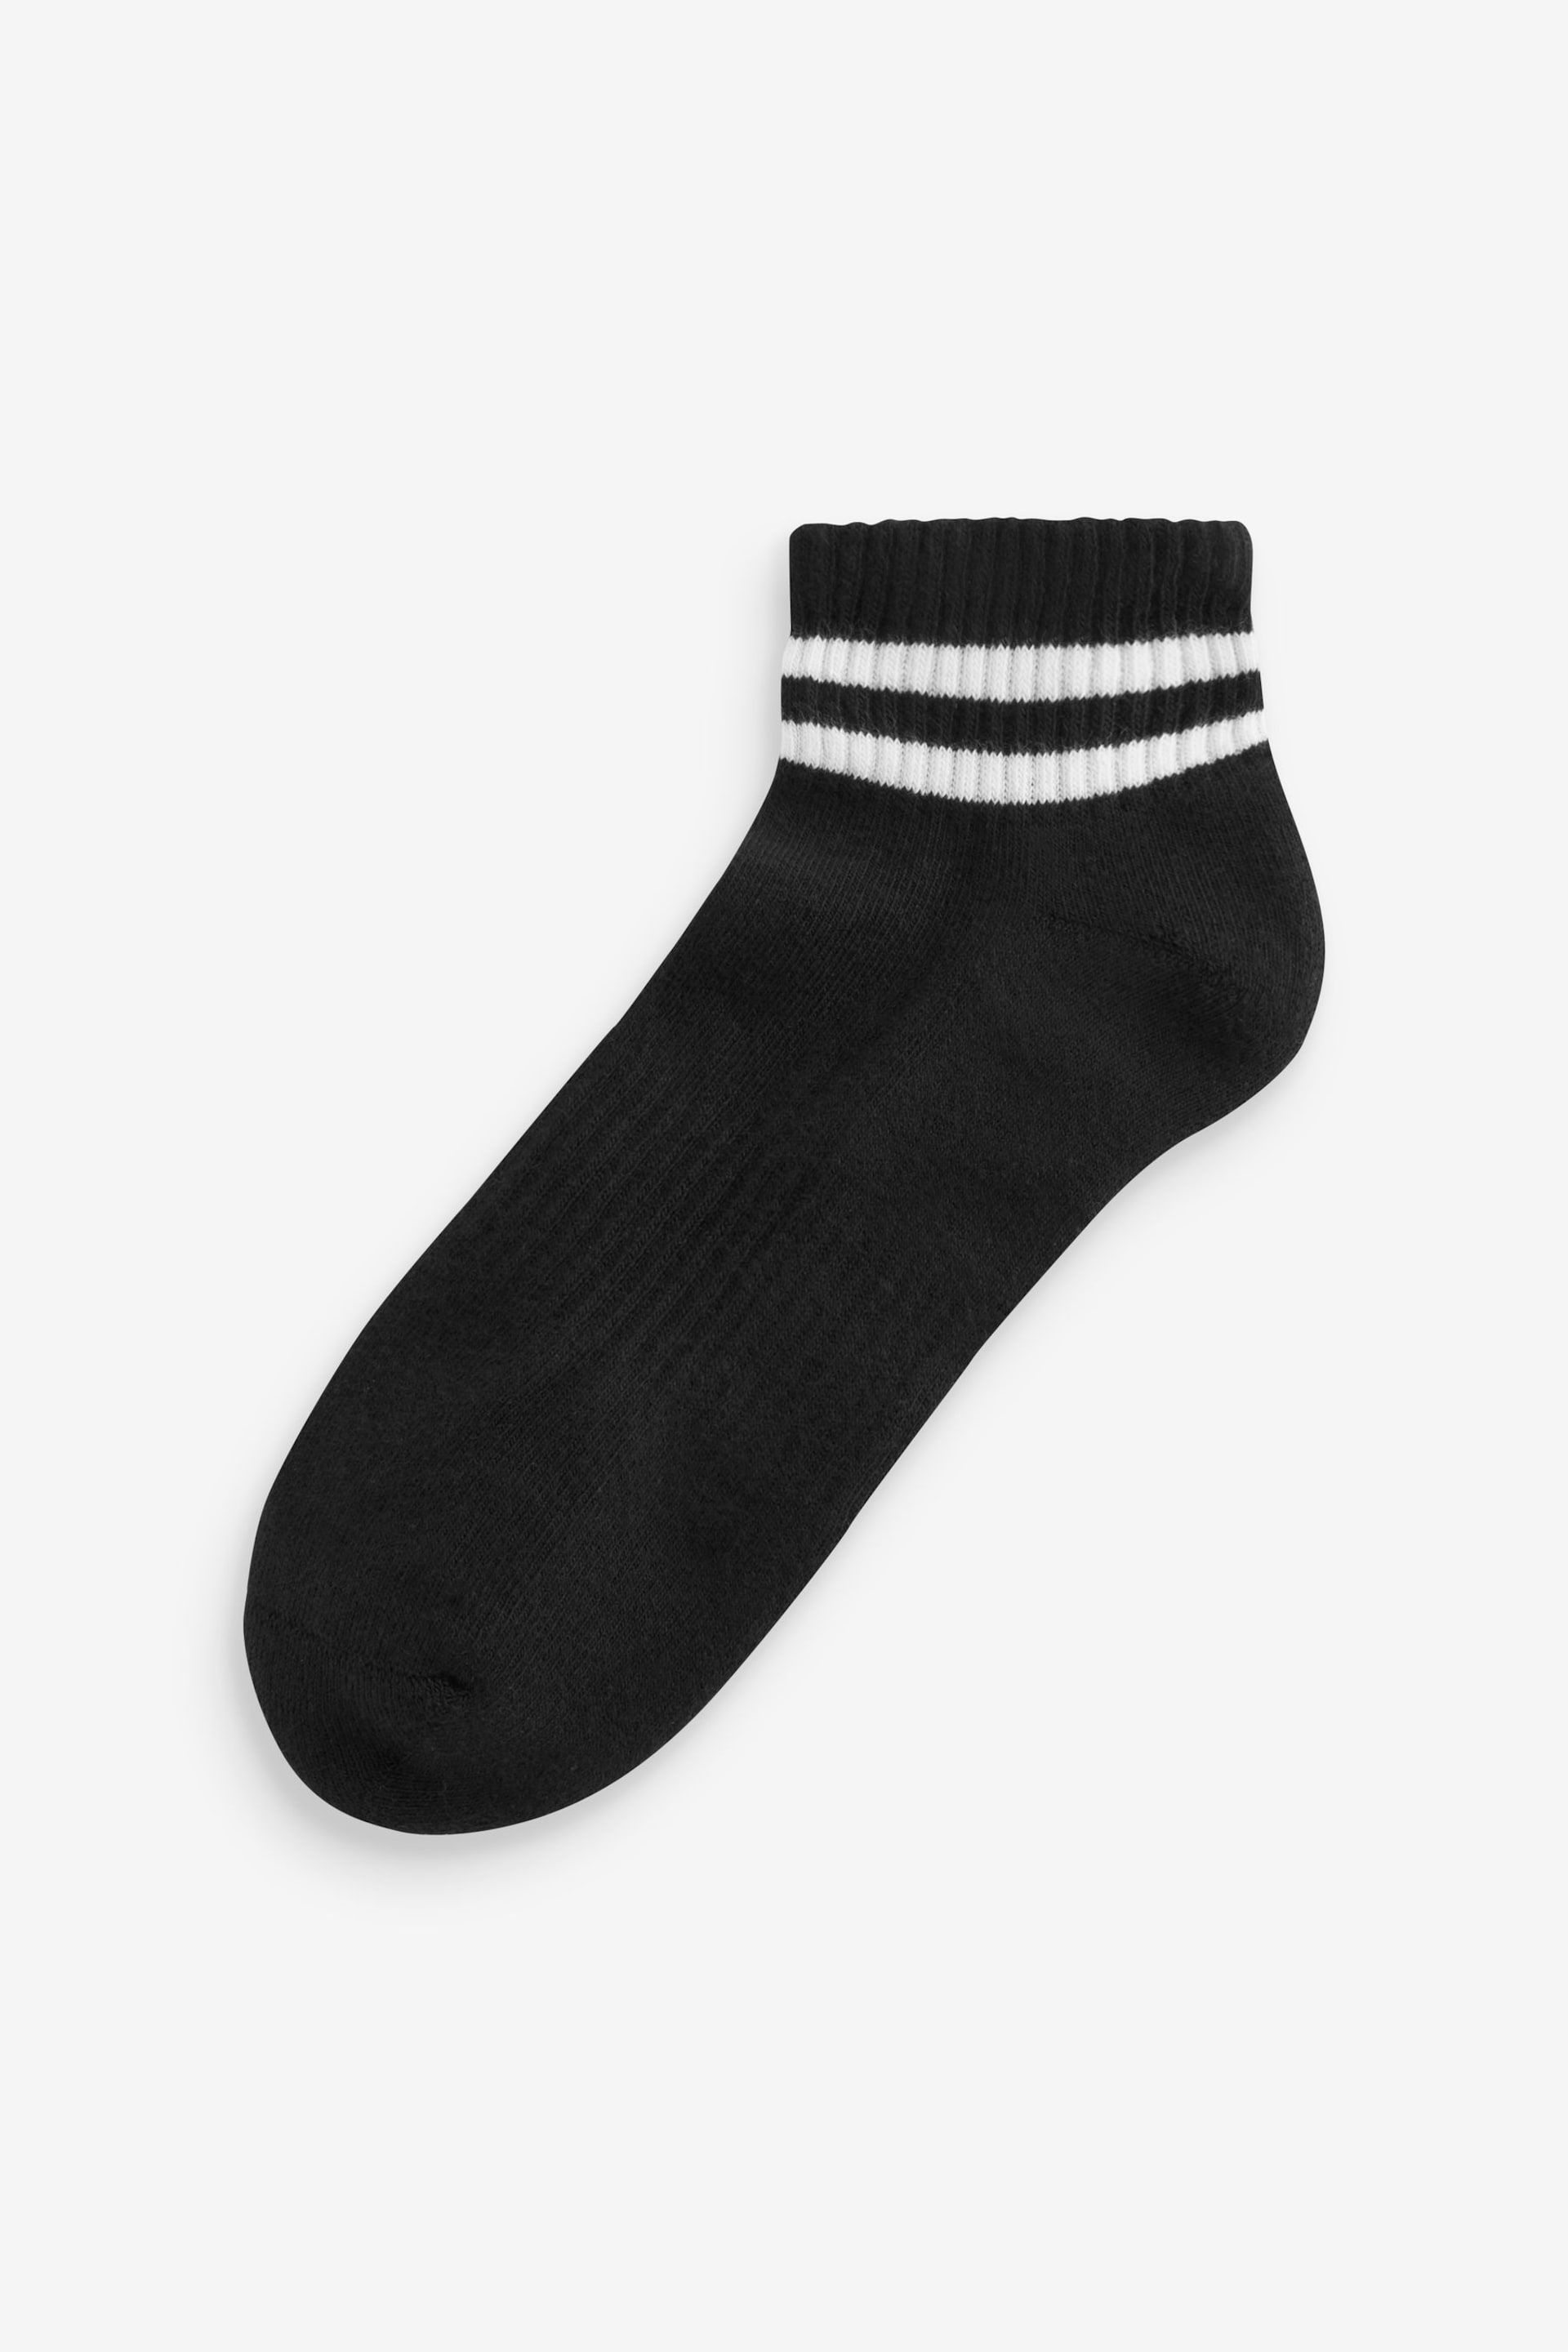 Black Stripe Cushion Sole Trainers Socks 3 Pack With Arch Support - Image 3 of 3